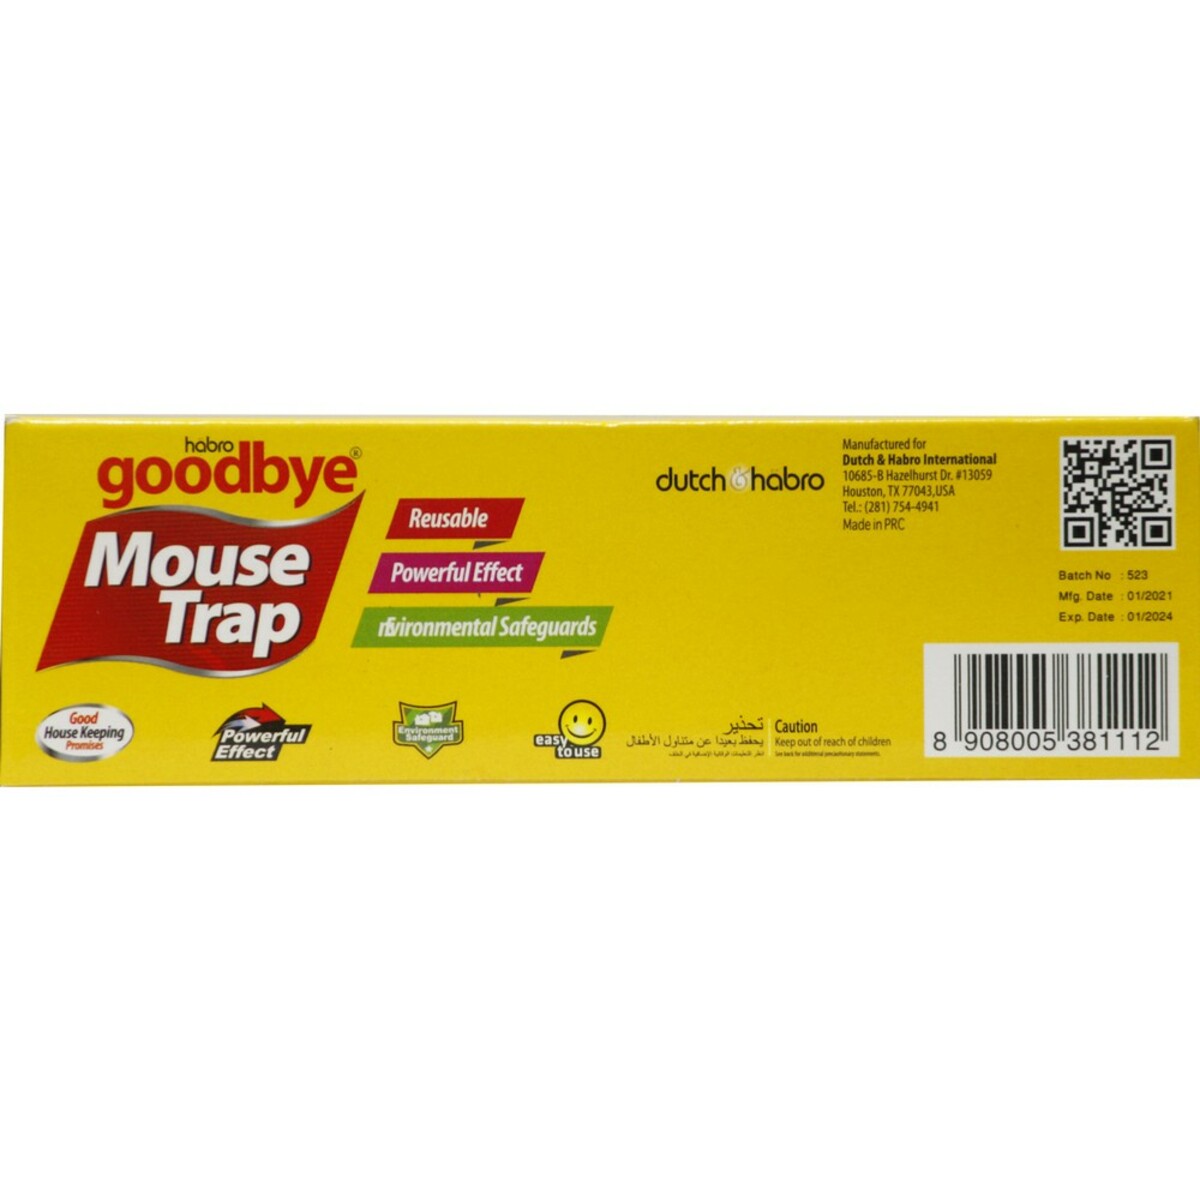 Habro Goodbye MouseTrap Sticky Plastic